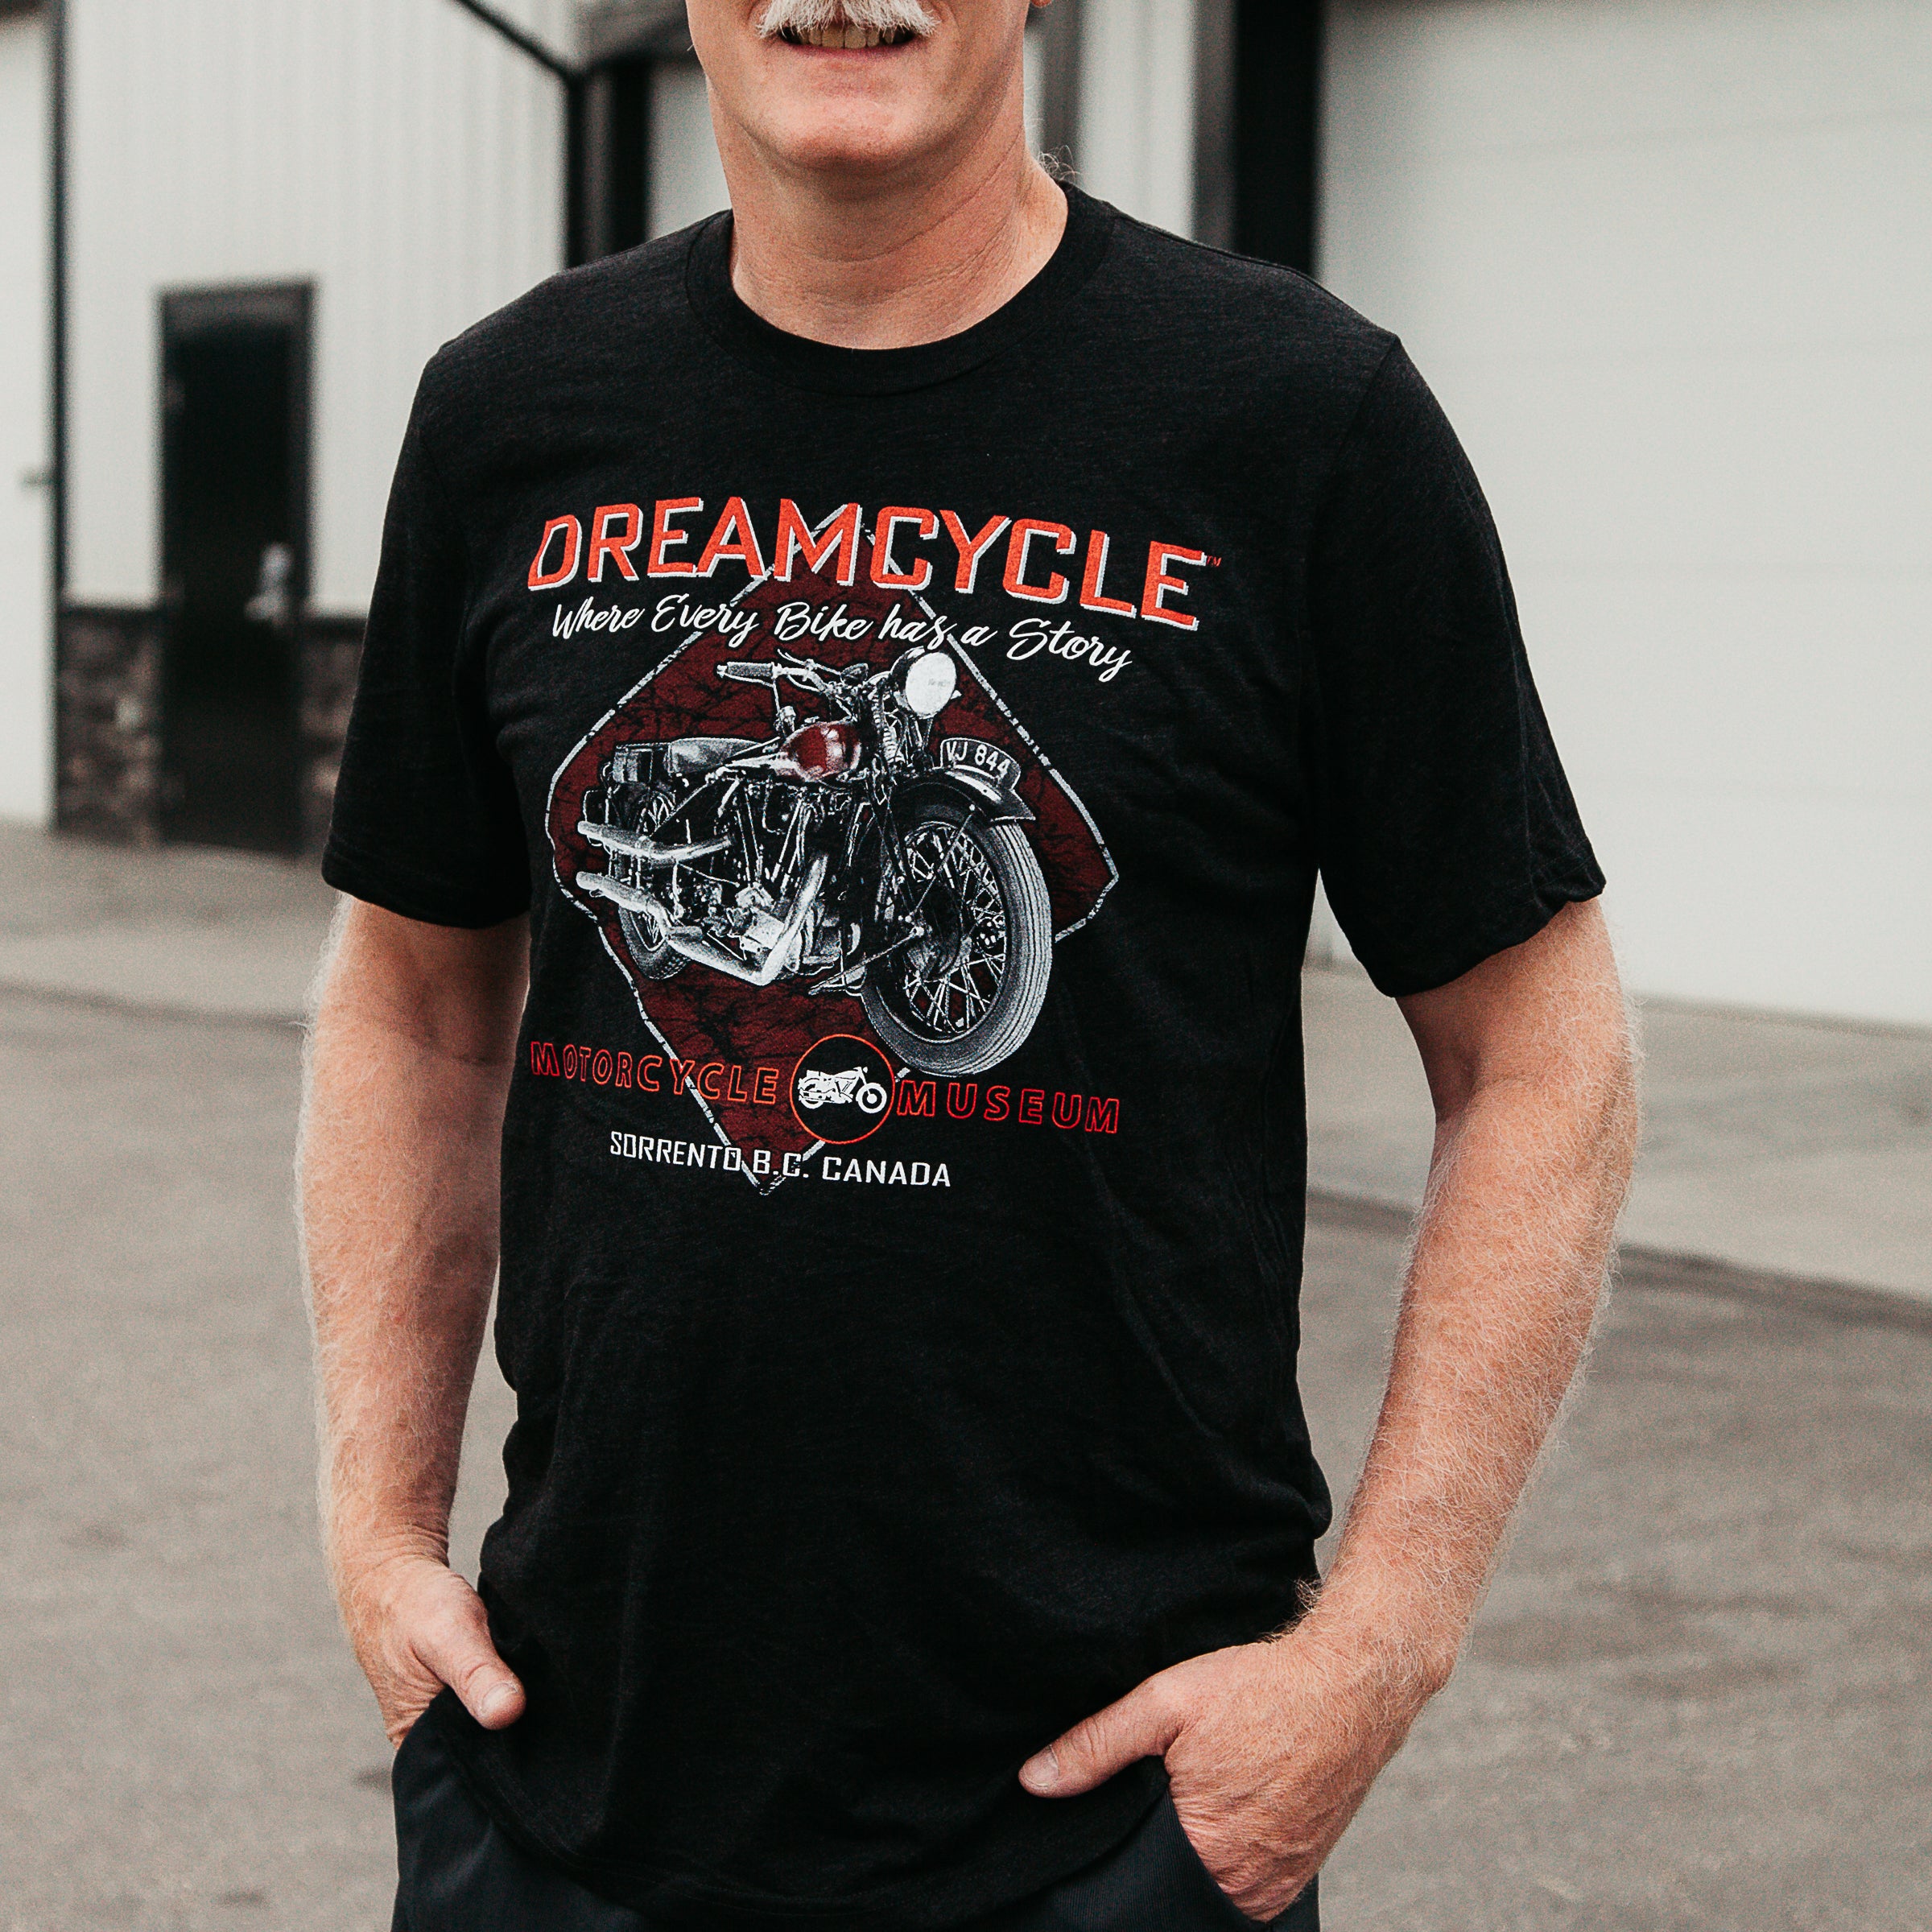 Dreamcycle Motorcycle Museum |  Close up of a man standing in a lifestyle setting wearing a shirt that says "`dreamcycle" With a motorcycle on the front.